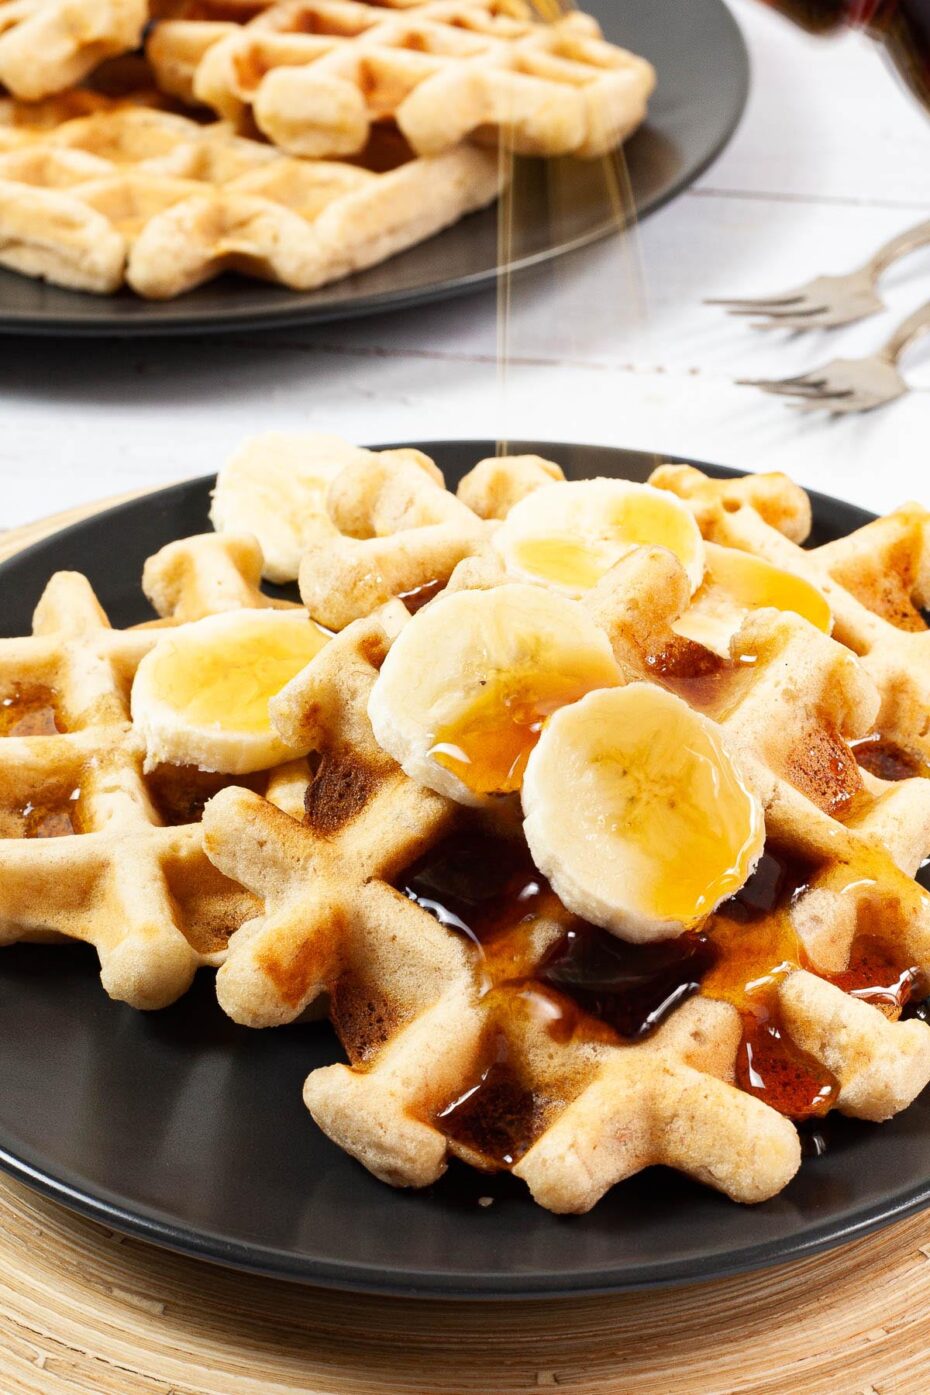 Black plate with a stack of waffles topped with sliced banana and maple syrup is pouring on them. There are 3 waffles on another black plate in the background.